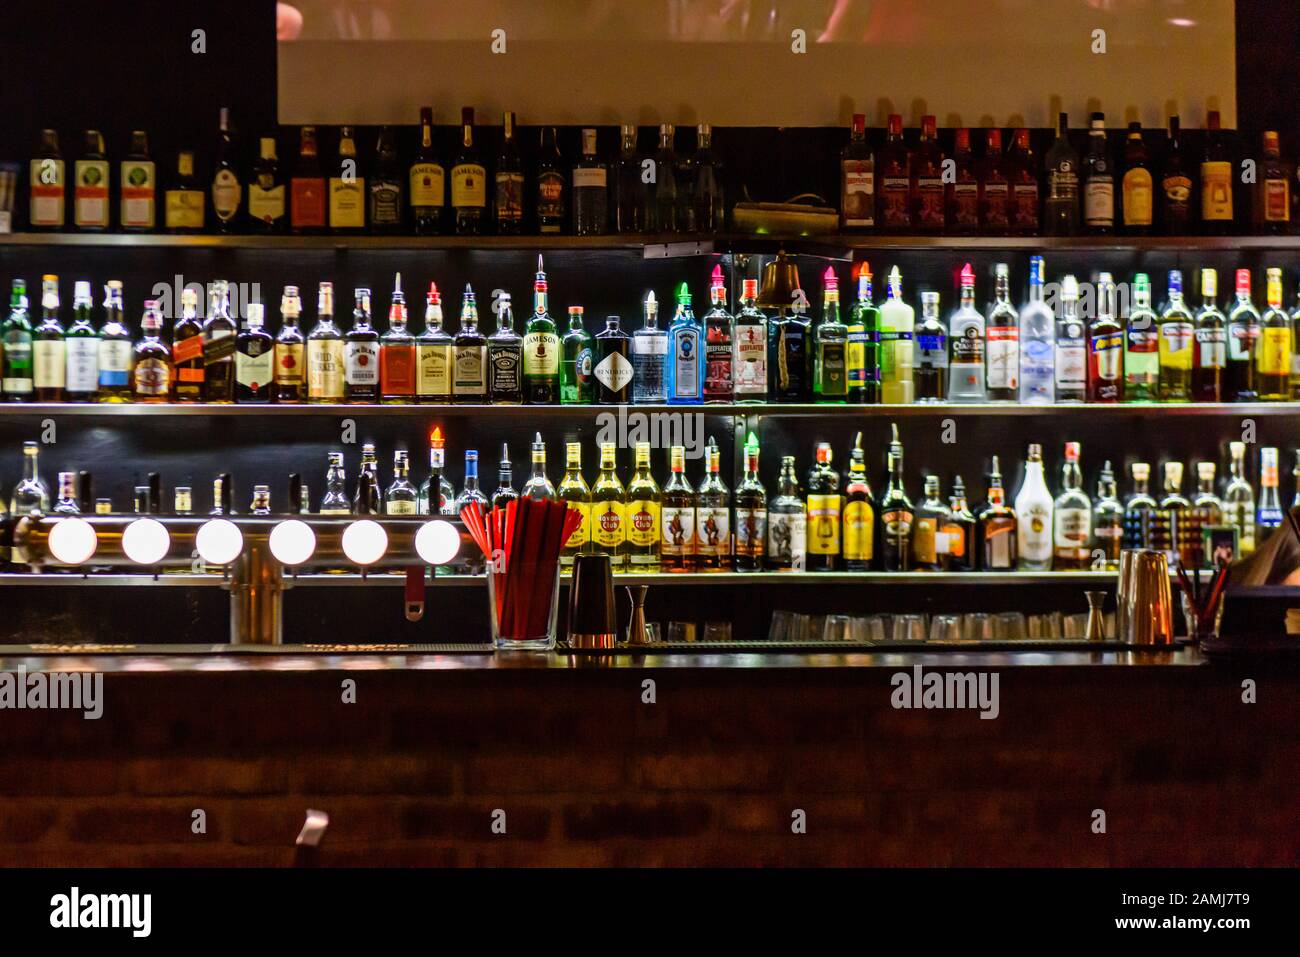 Lots of bottles on display at a cocktail bar, Prague, Czech Republic Stock Photo